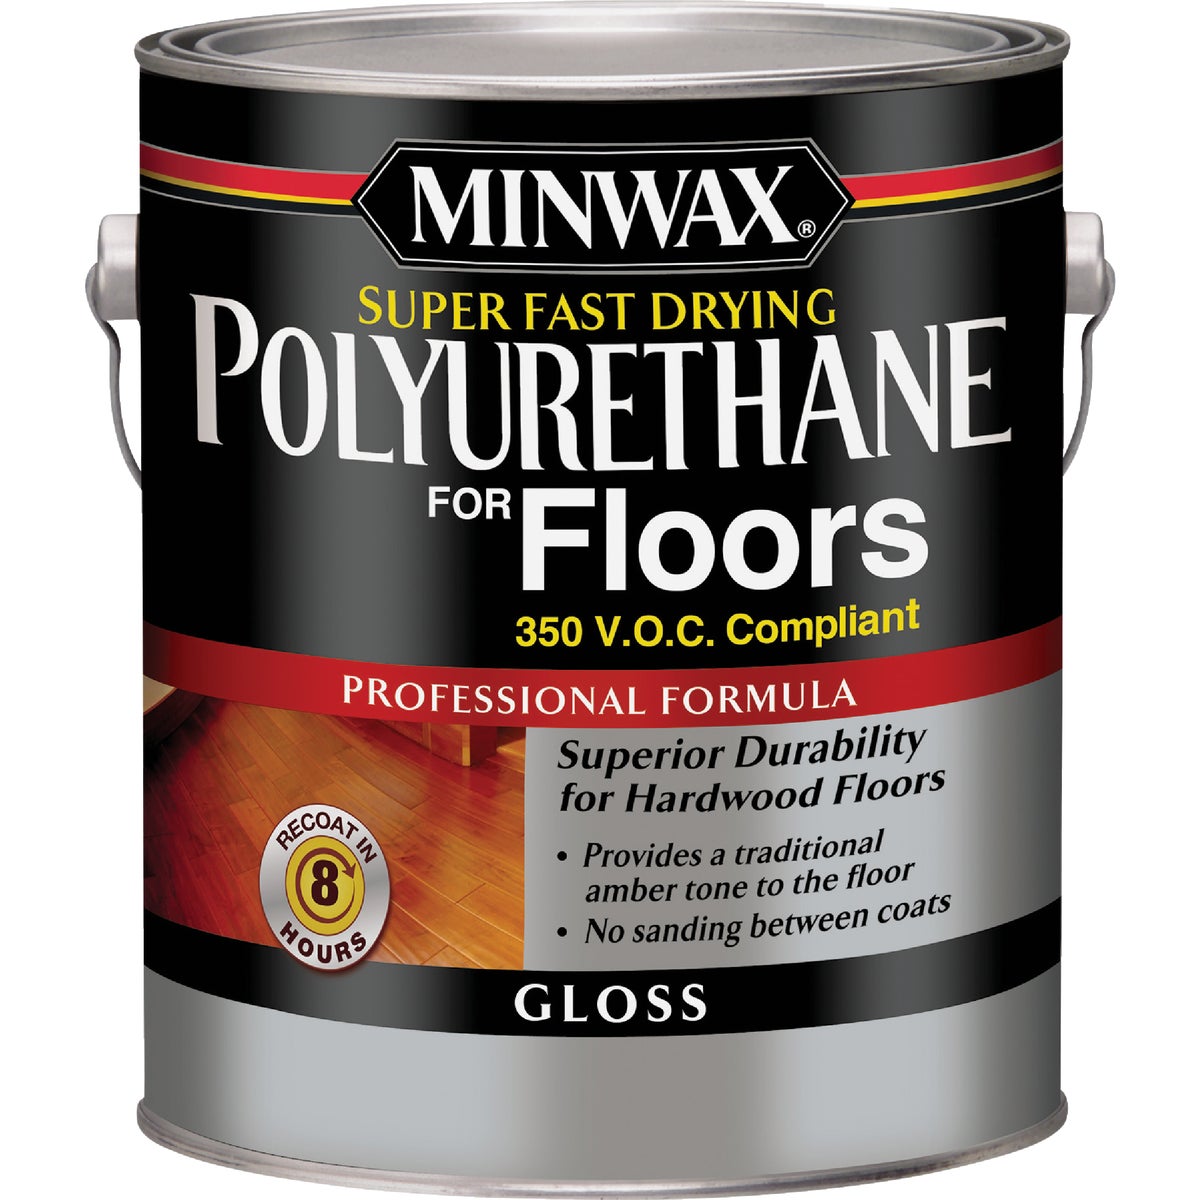 Item 771221, Polyurethane for floors has 3 big benefits that make it unique and 